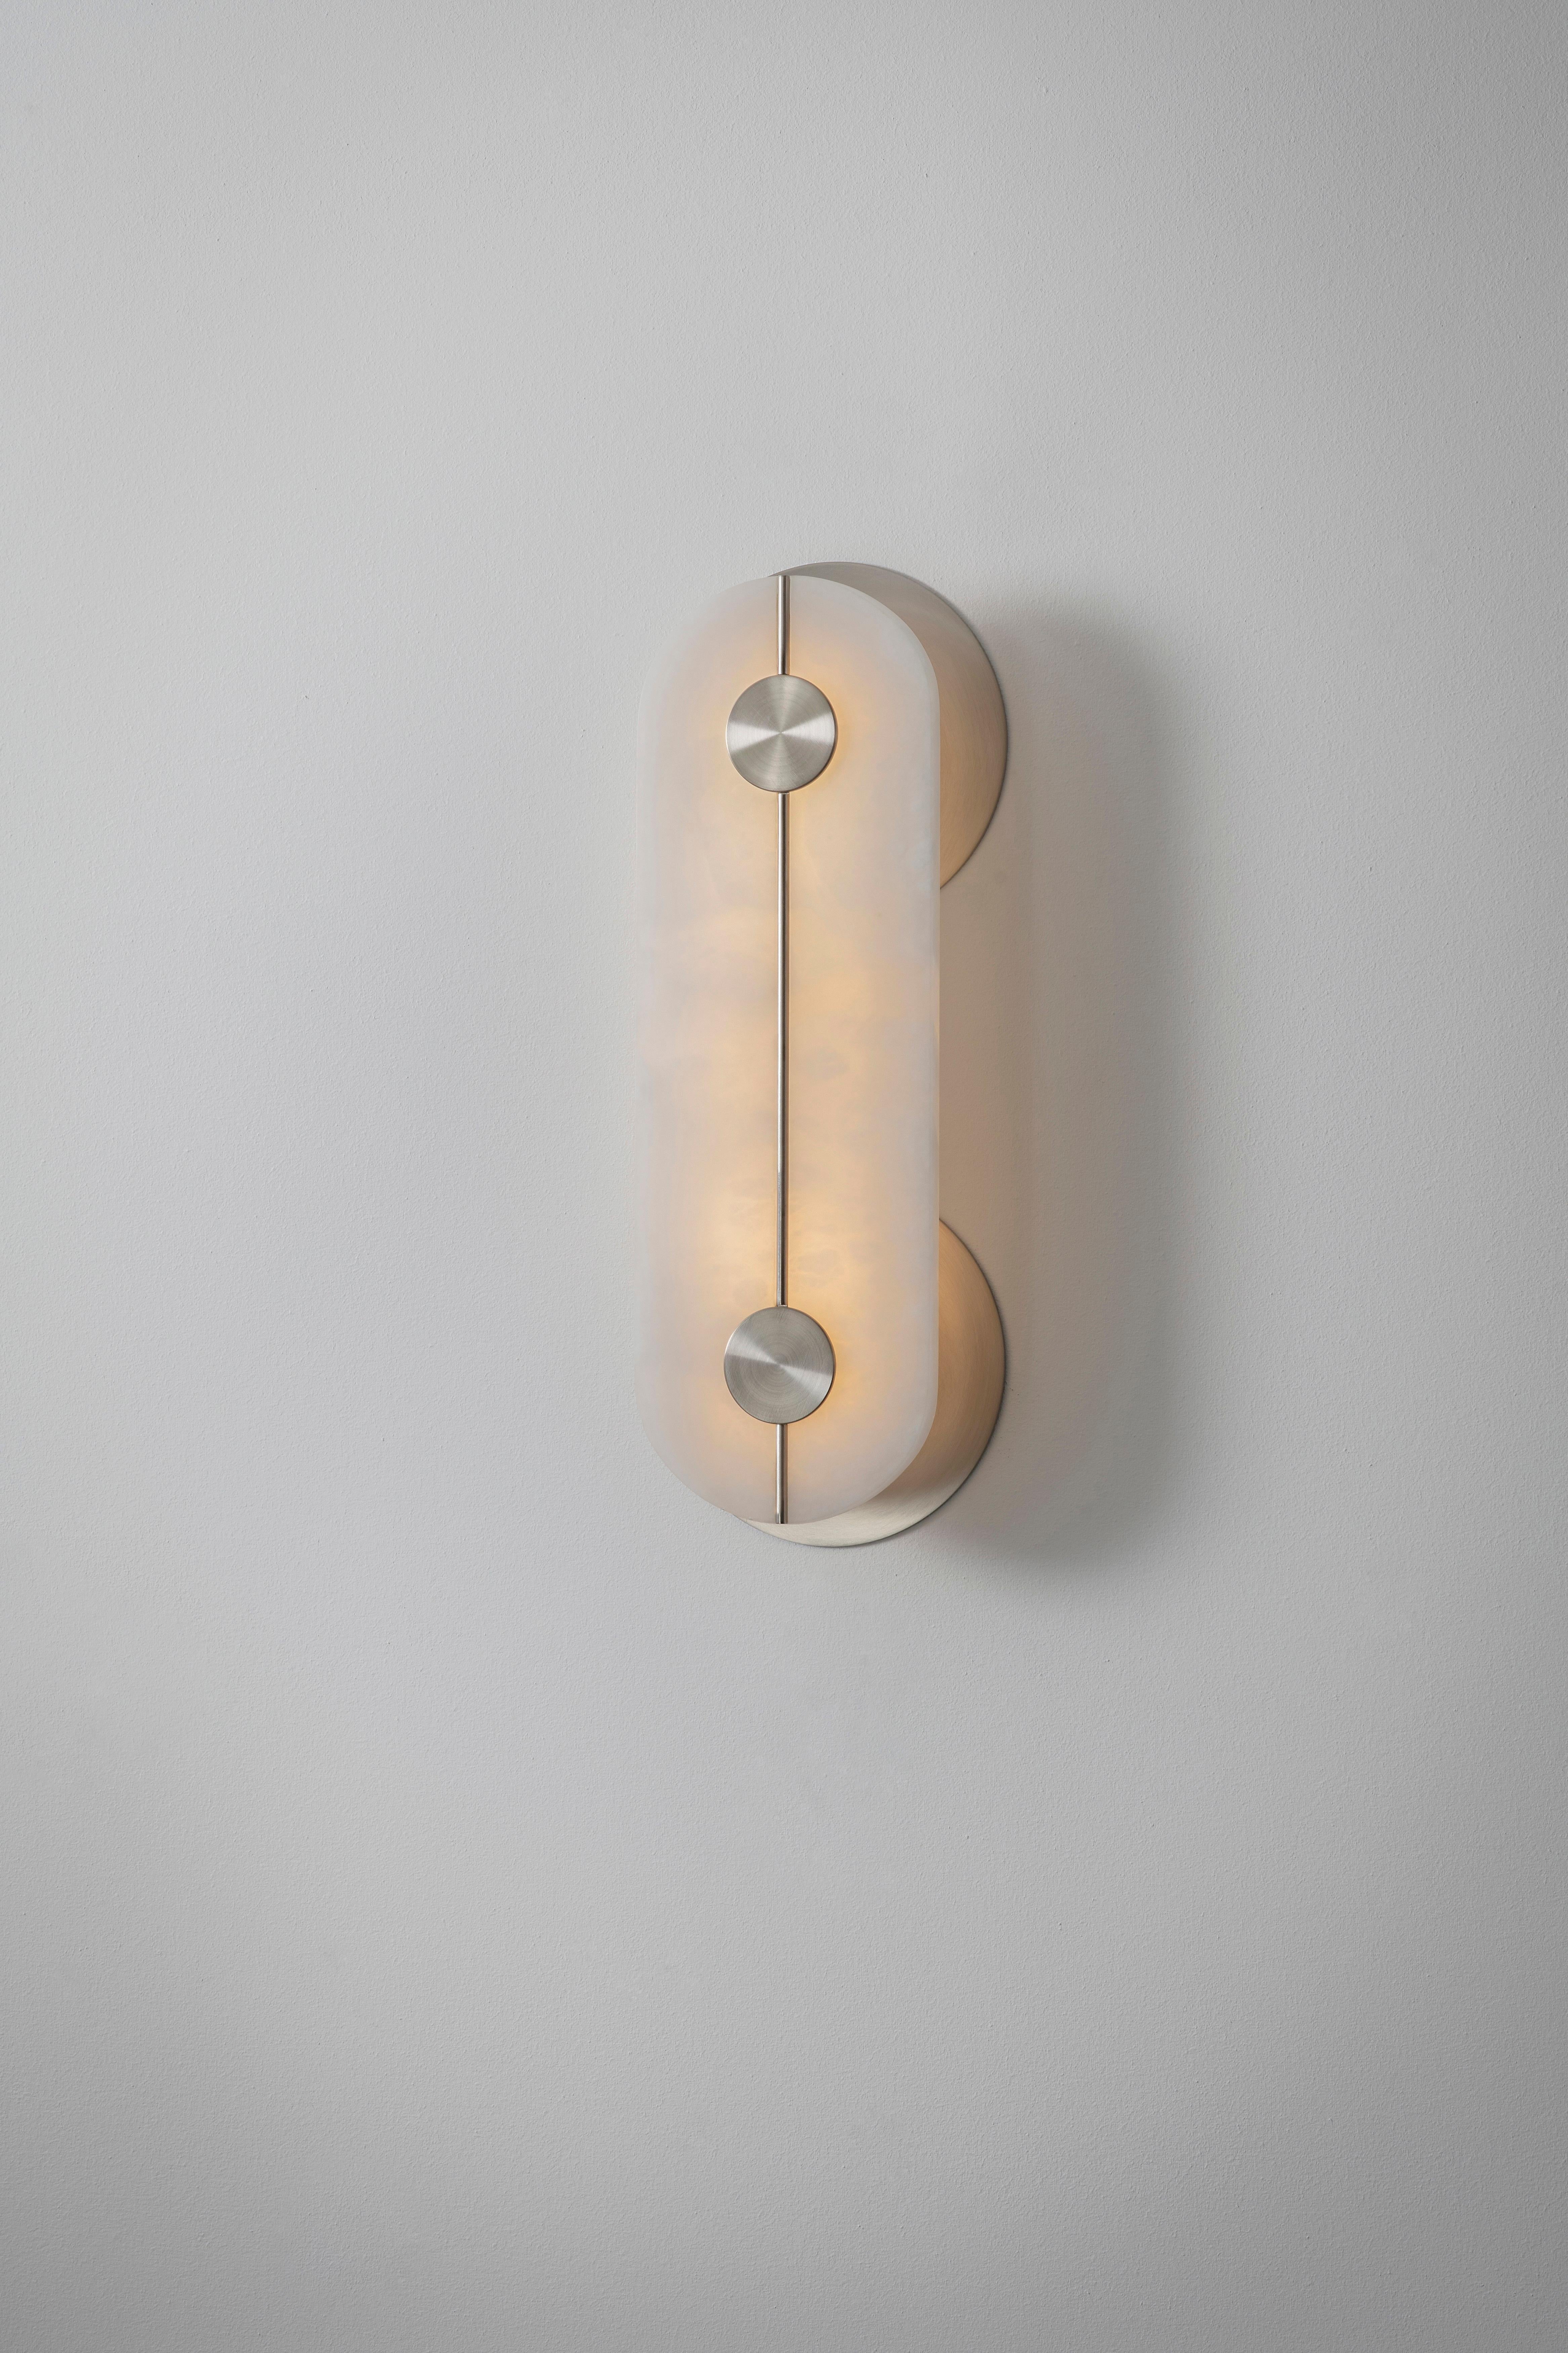 Brace wall light nickel large by Bert Frank
Dimensions: 7 x 24 x H 64 cm 
Materials: Nickel, Alabaster


All our lamps can be wired according to each country. If sold to the USA it will be wired for the USA for instance.

When Adam Yeats and